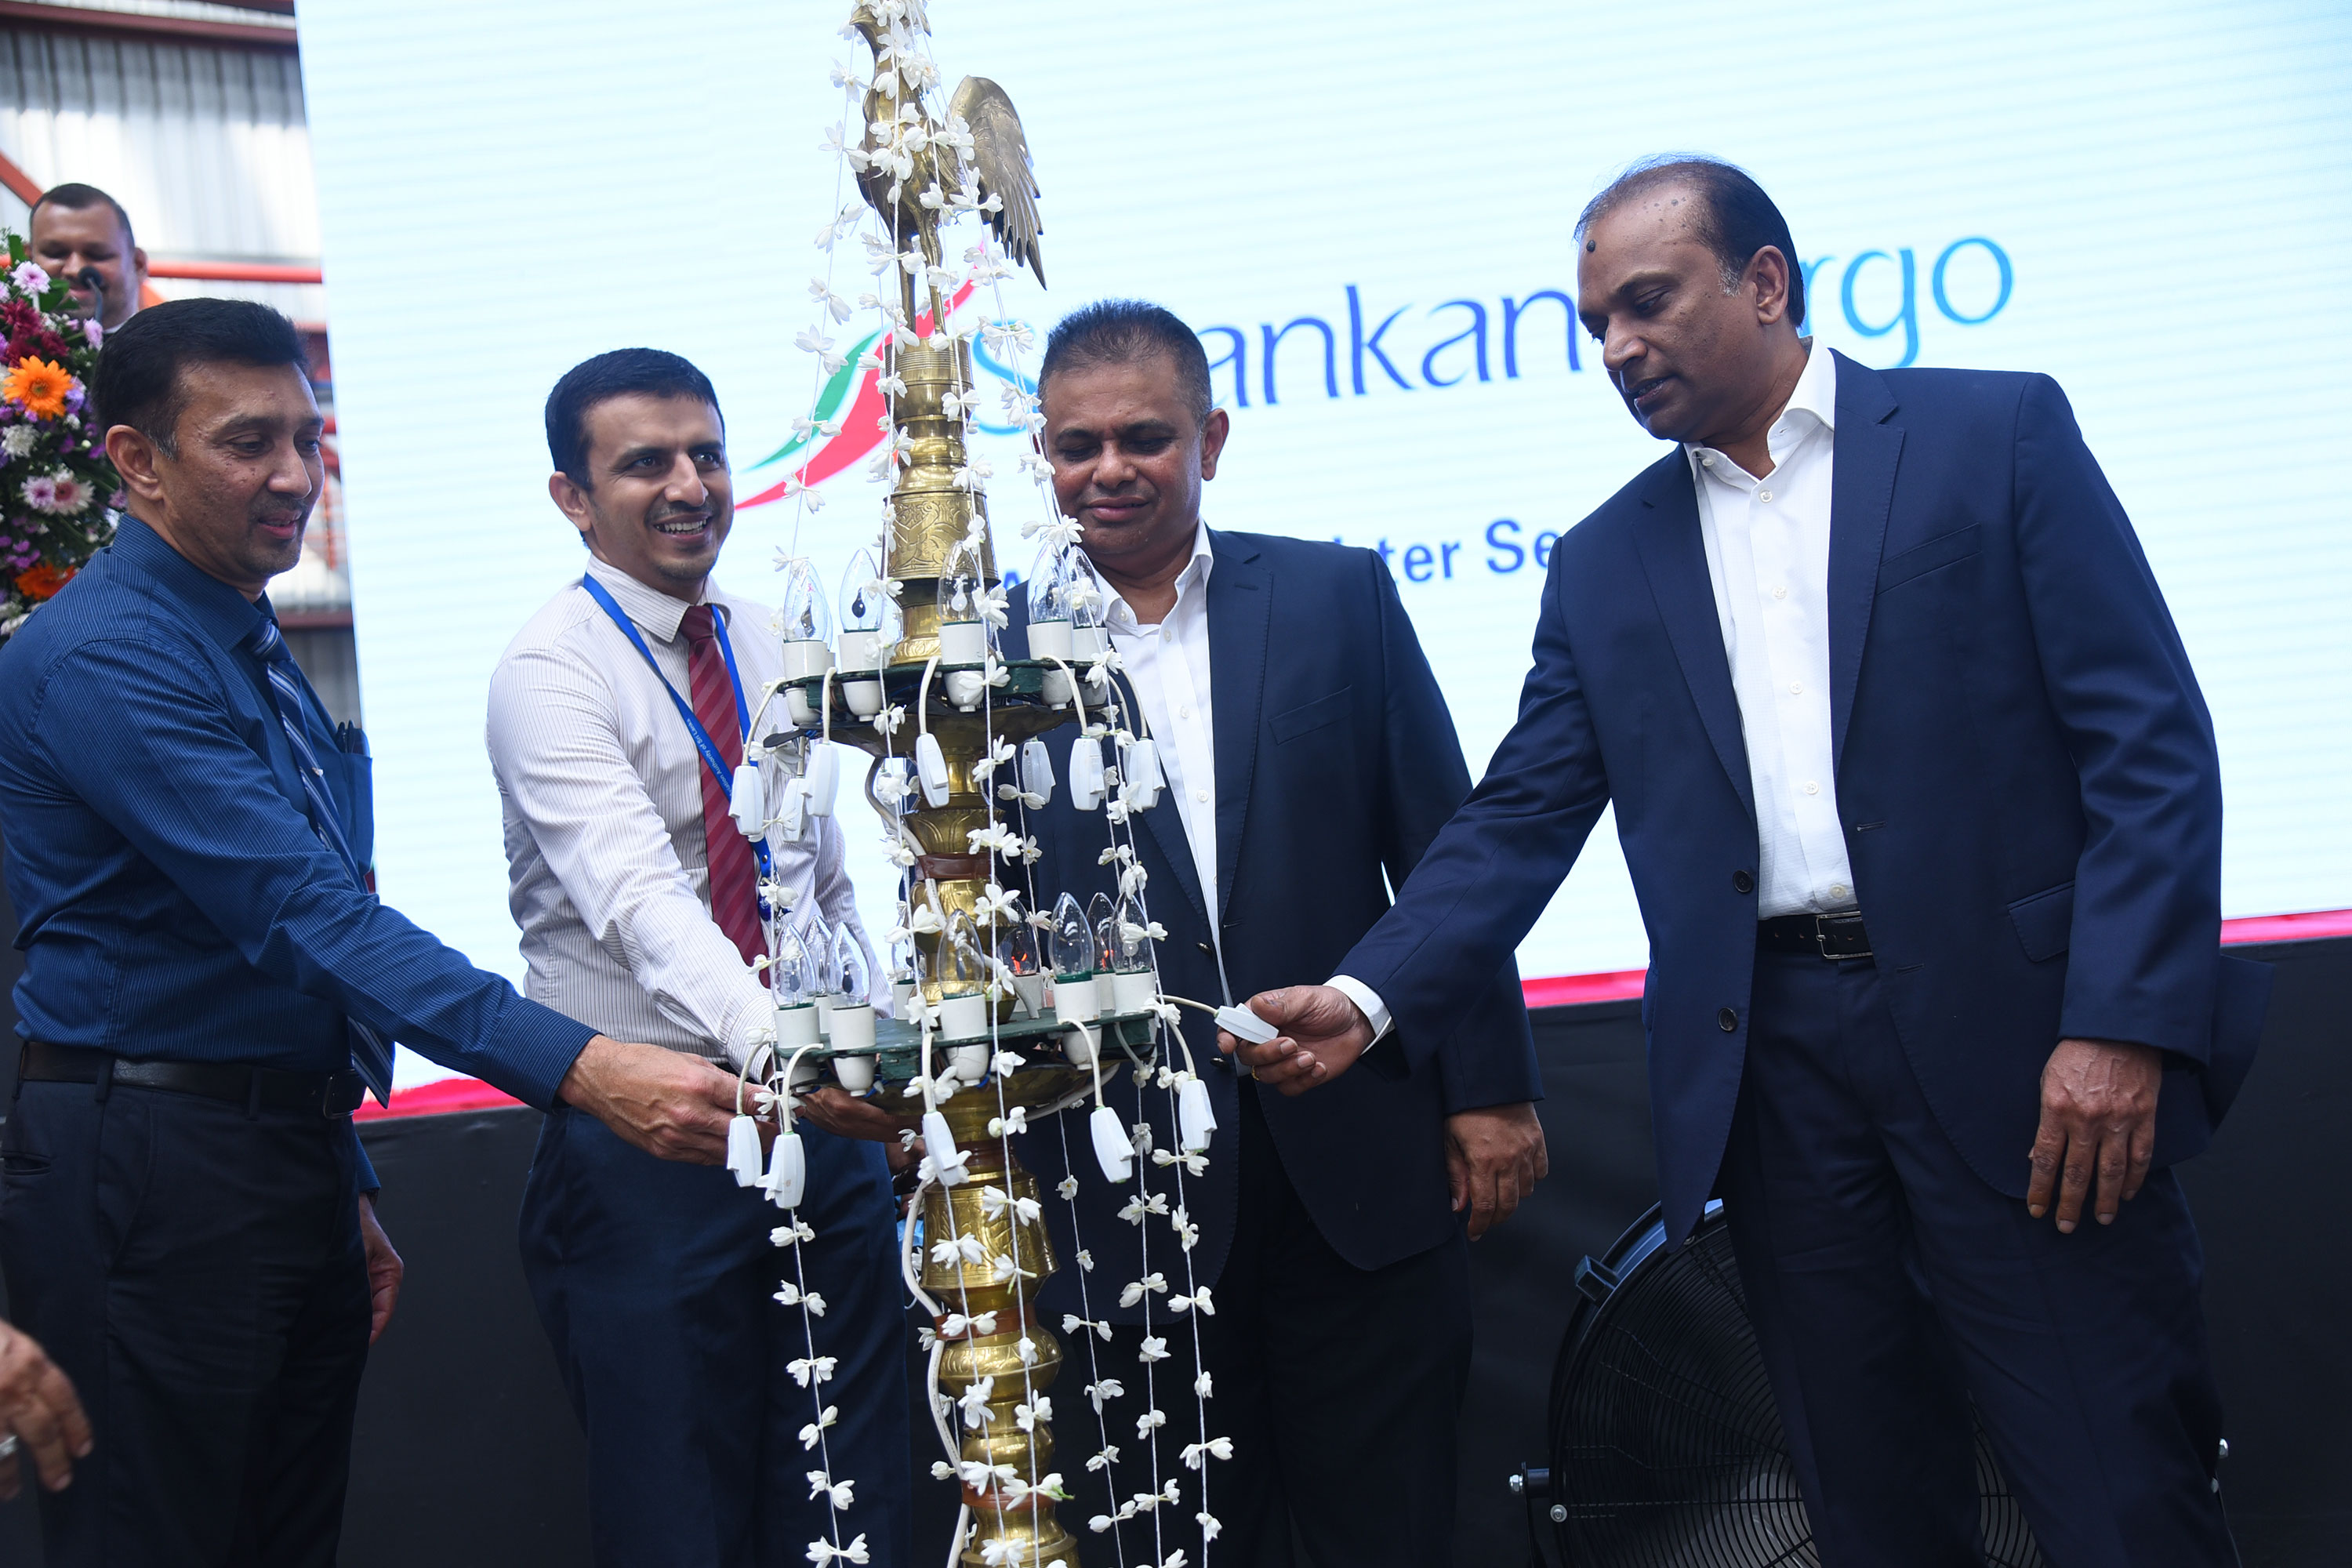 Lighting of the oil lamp on this historic occasion by Mr.Ashok Pathirage -  Chairman of SriLankan Airlines at the launch of SriLankan Cargo’s first ever wide body Airbus A330-200 freighter aircraft